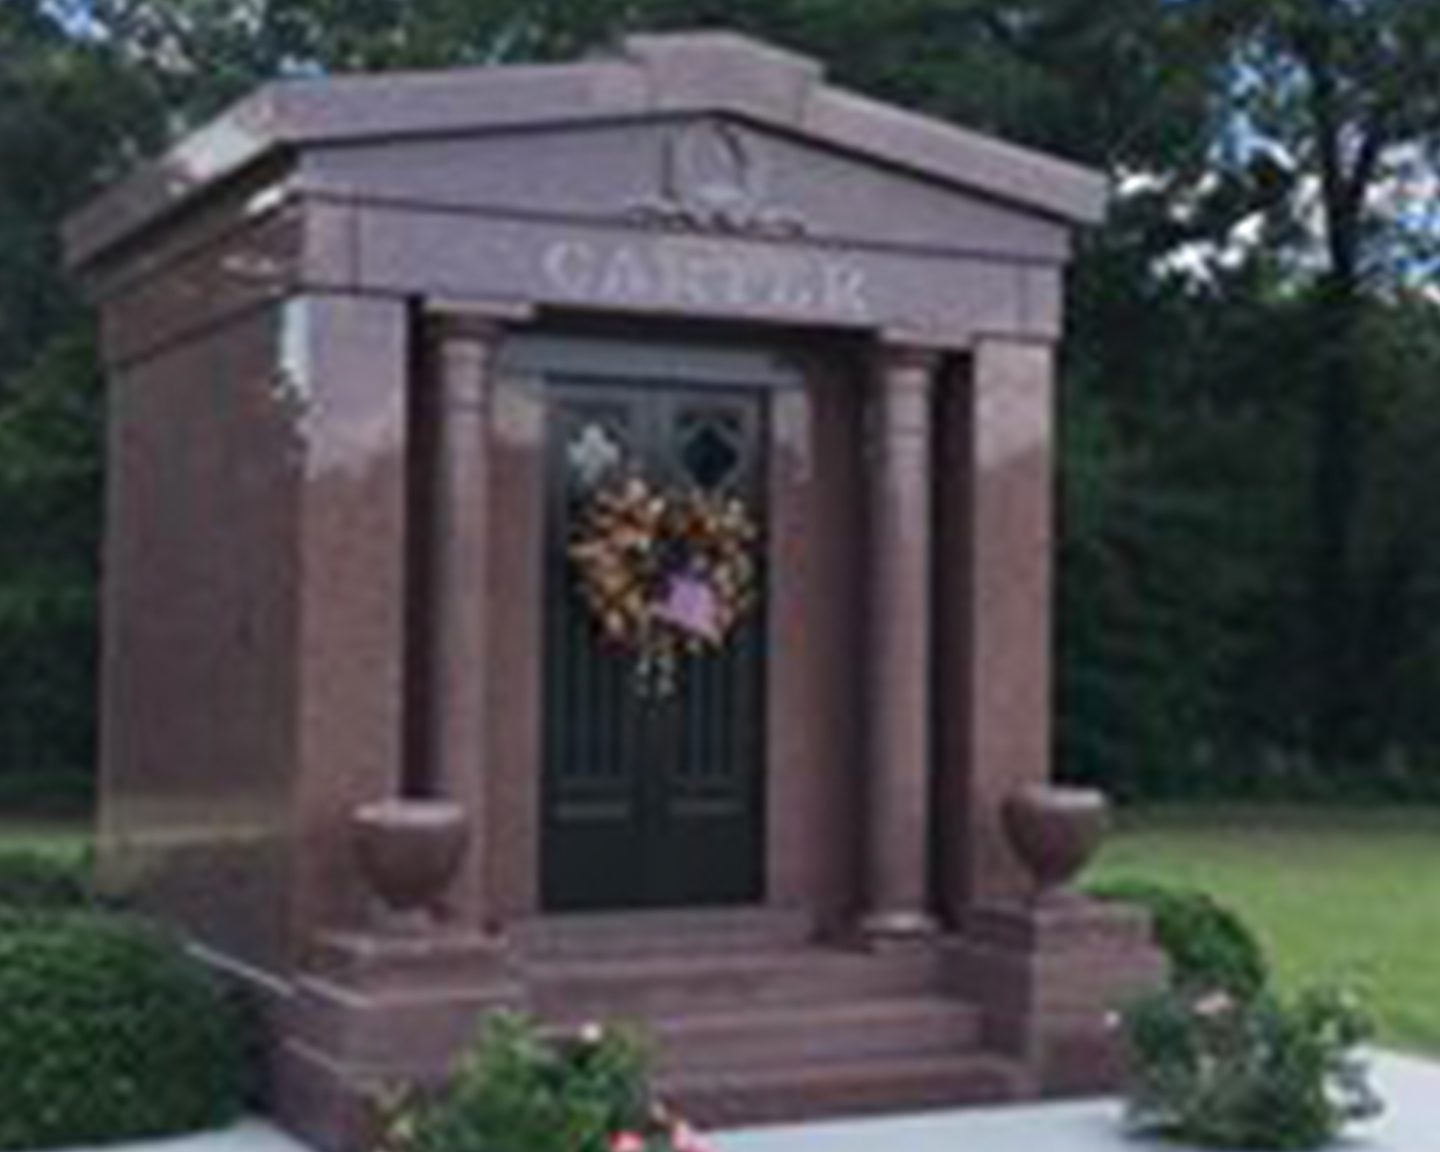 Estate Mausoleums and Plots from Parkway Memorial Gardens in Warner Robins, GA.